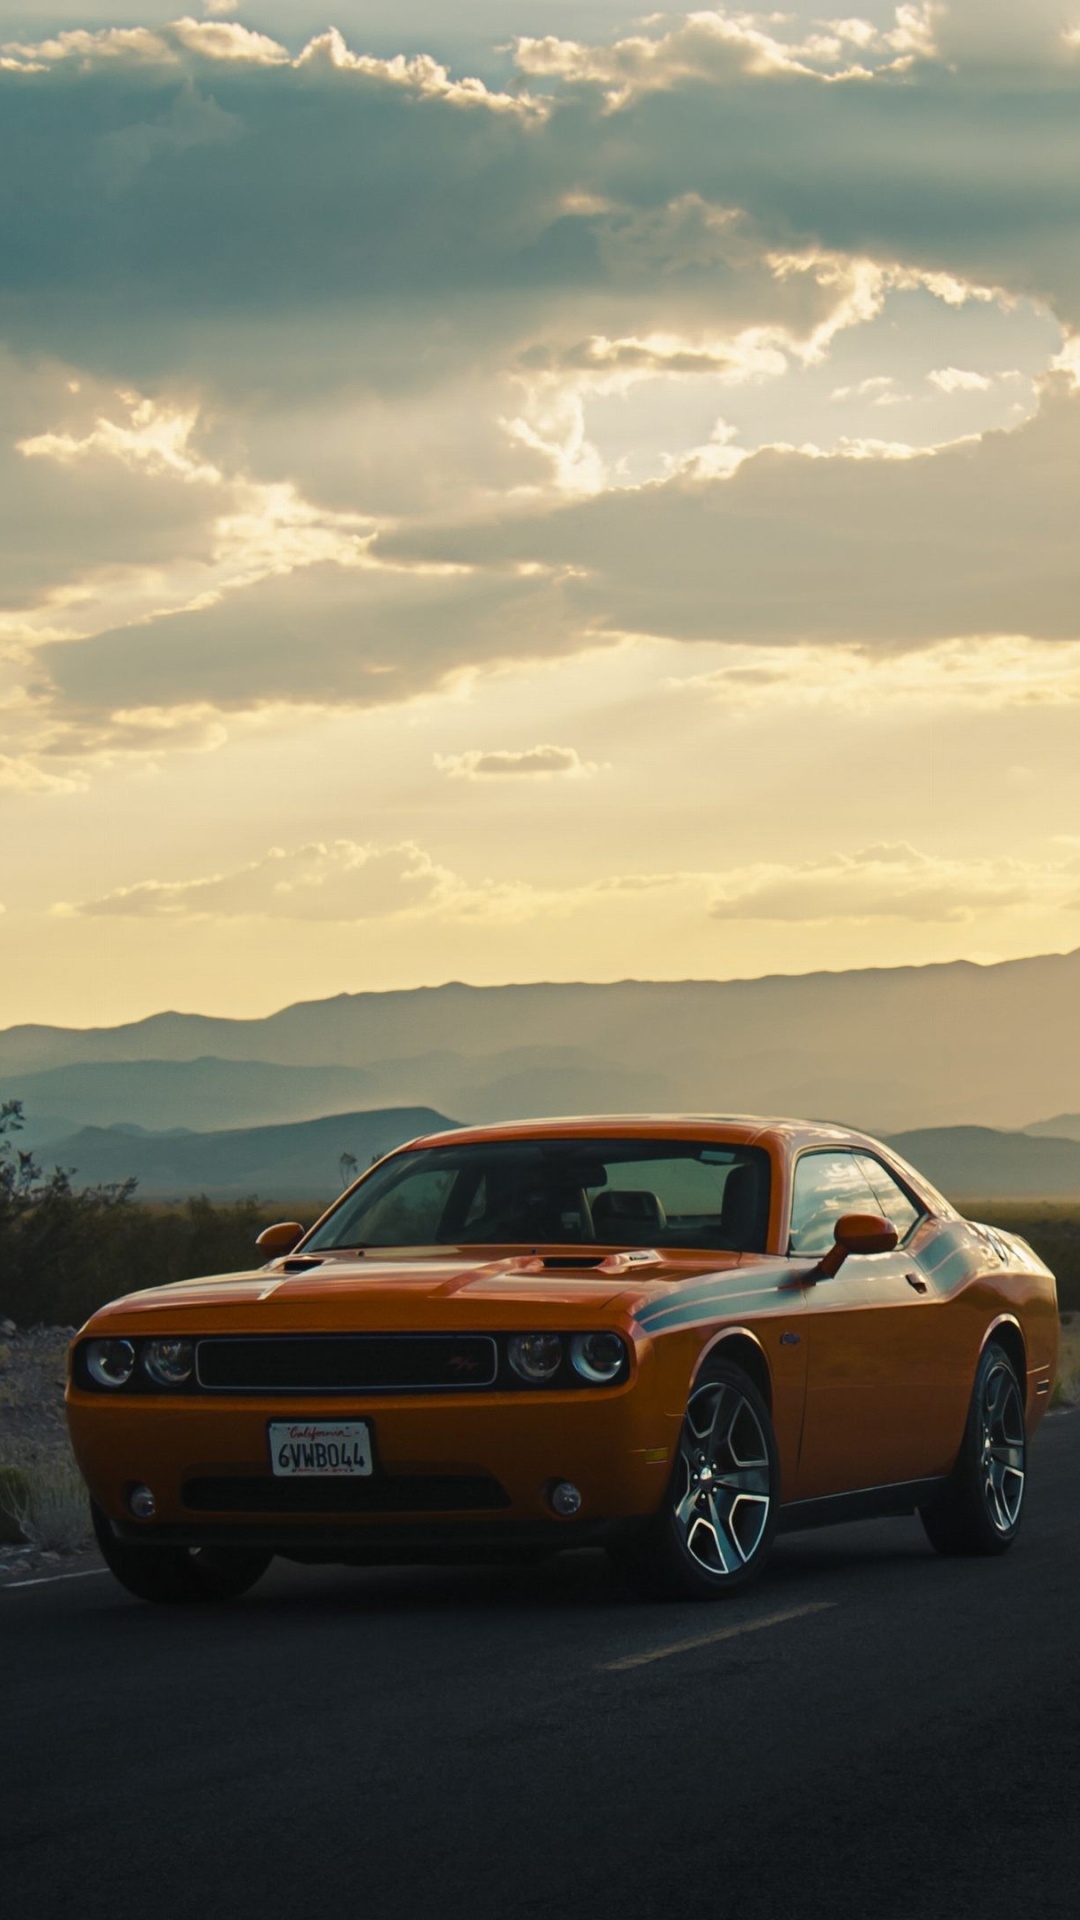 Dodge vehicles, Muscle car lineup, American power, Aggressive styling, 1080x1920 Full HD Handy